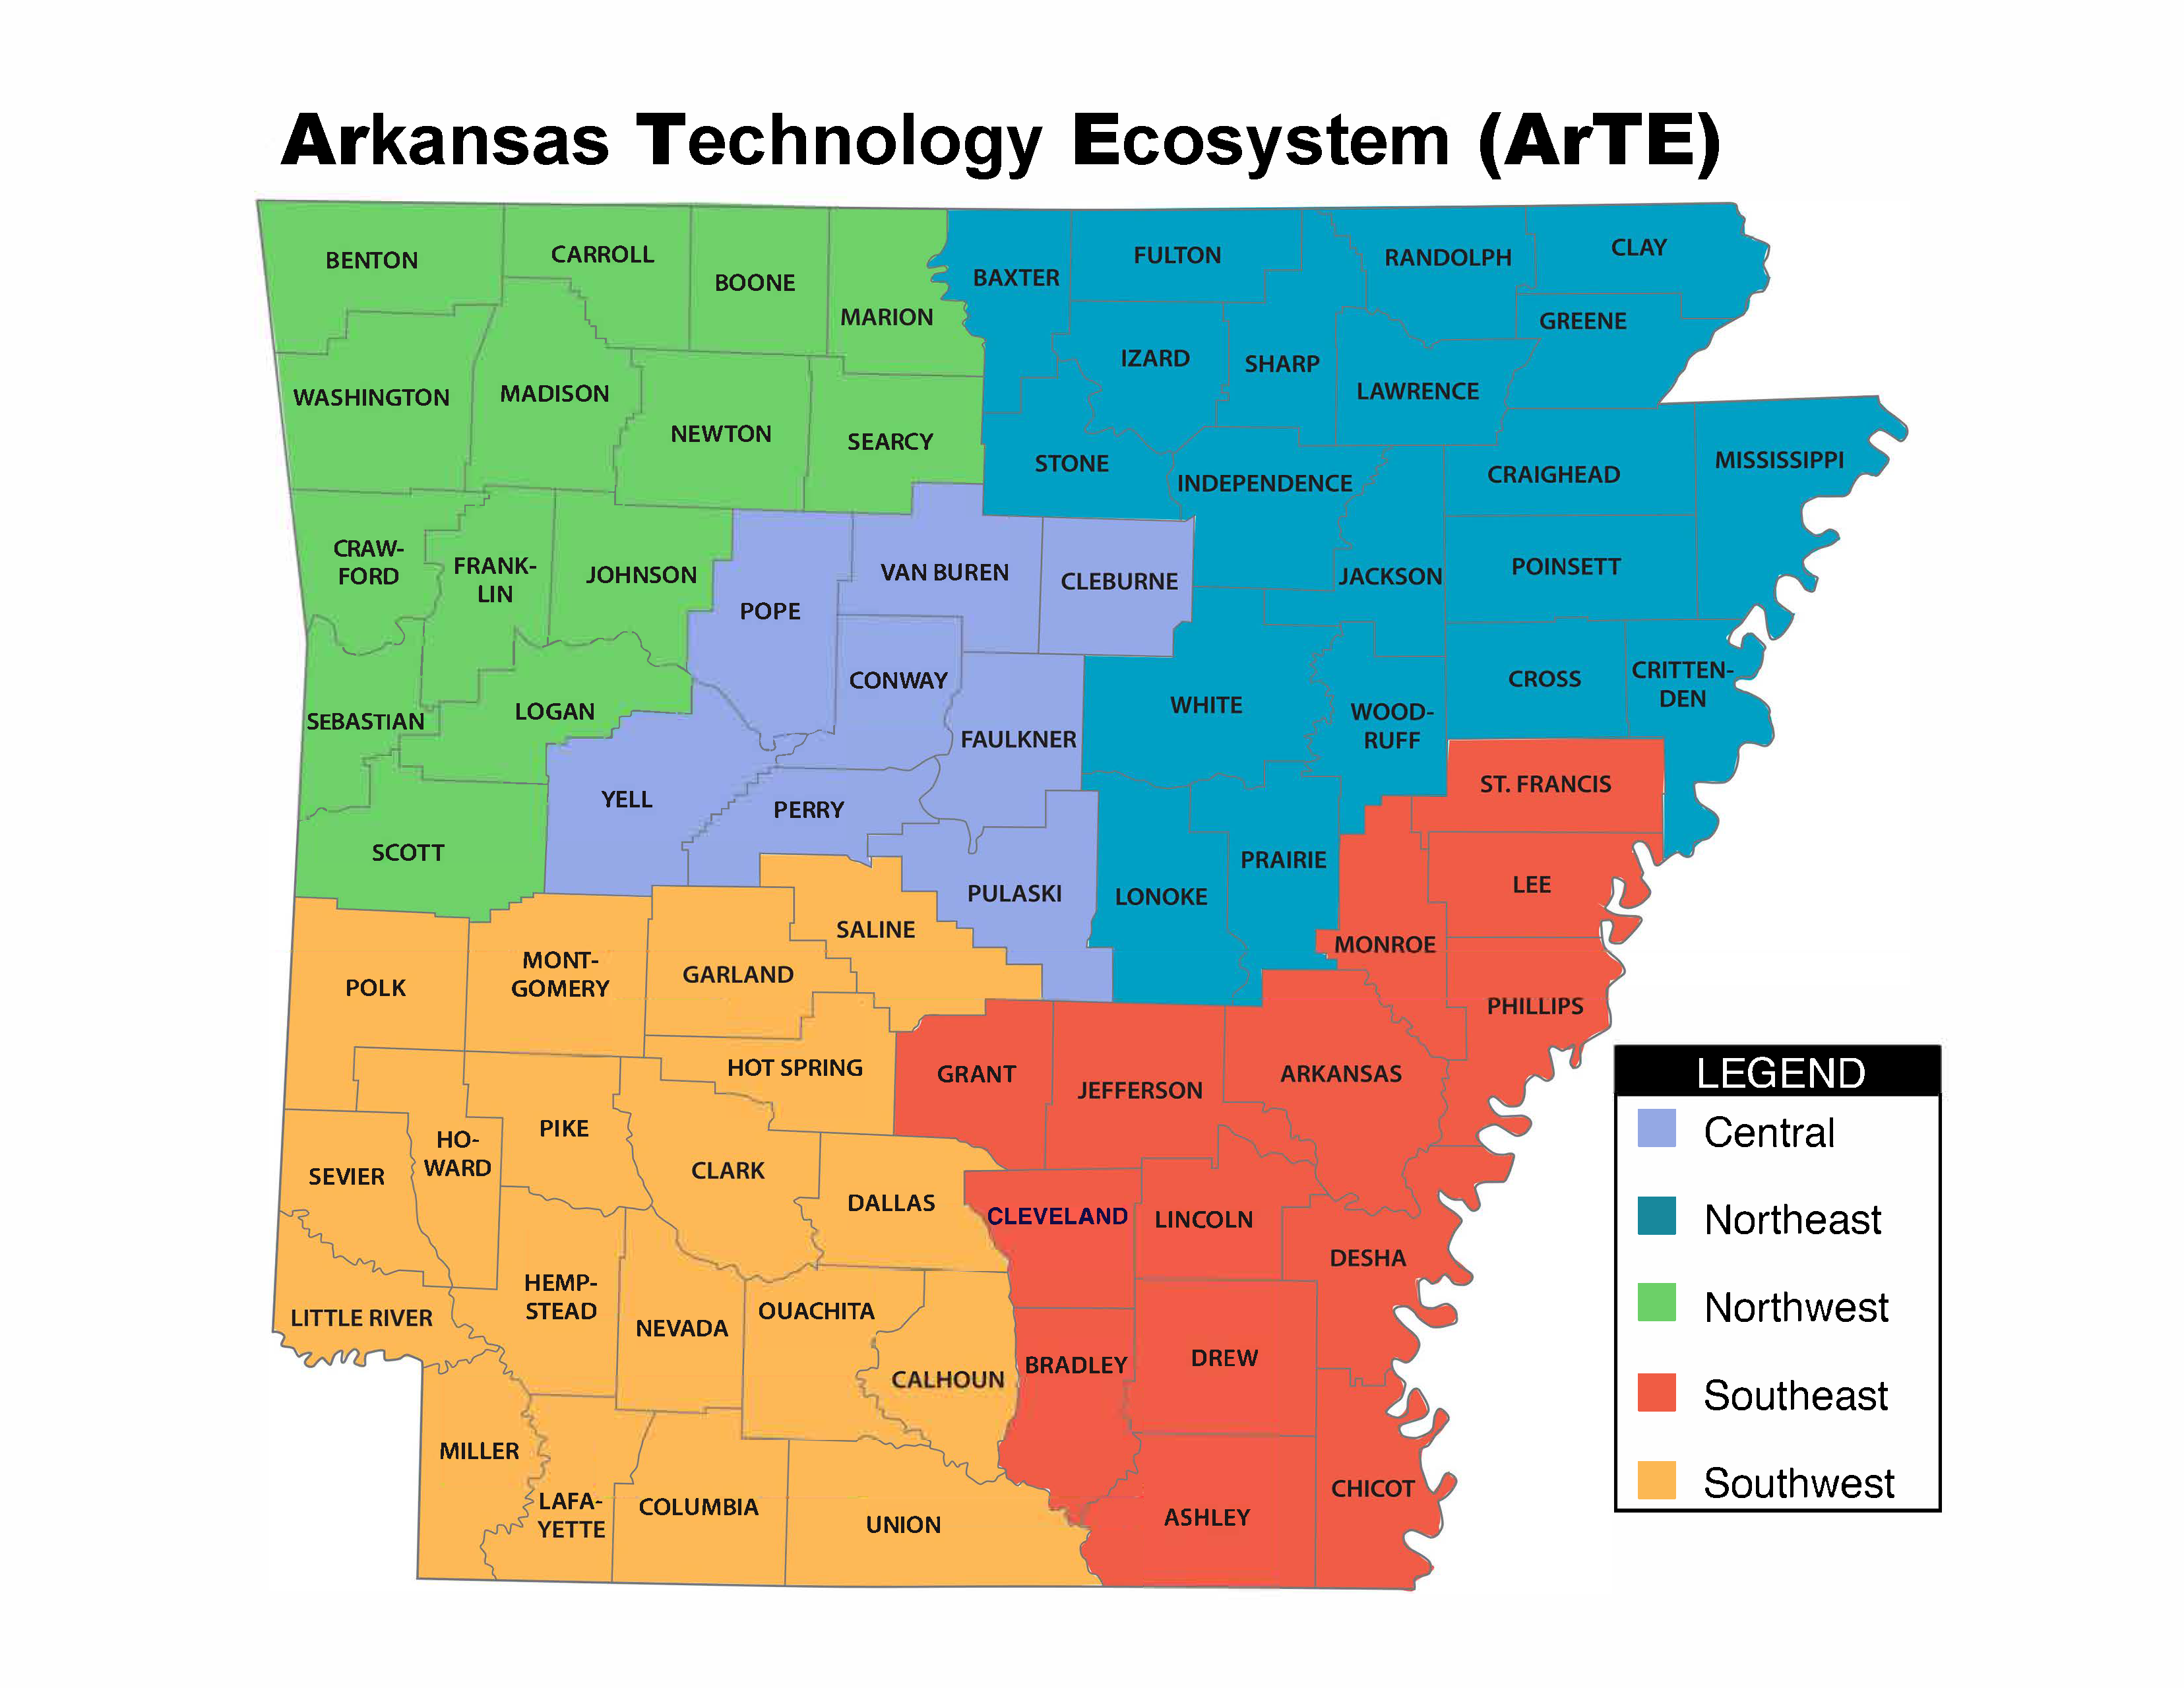 Map of Arkansas Technology Ecosystem. Five regions are within the state of Arkansas. Please visit the following site to identify which counties belong in which region: https://adhe.edu/File/ARTE Regions.pdf